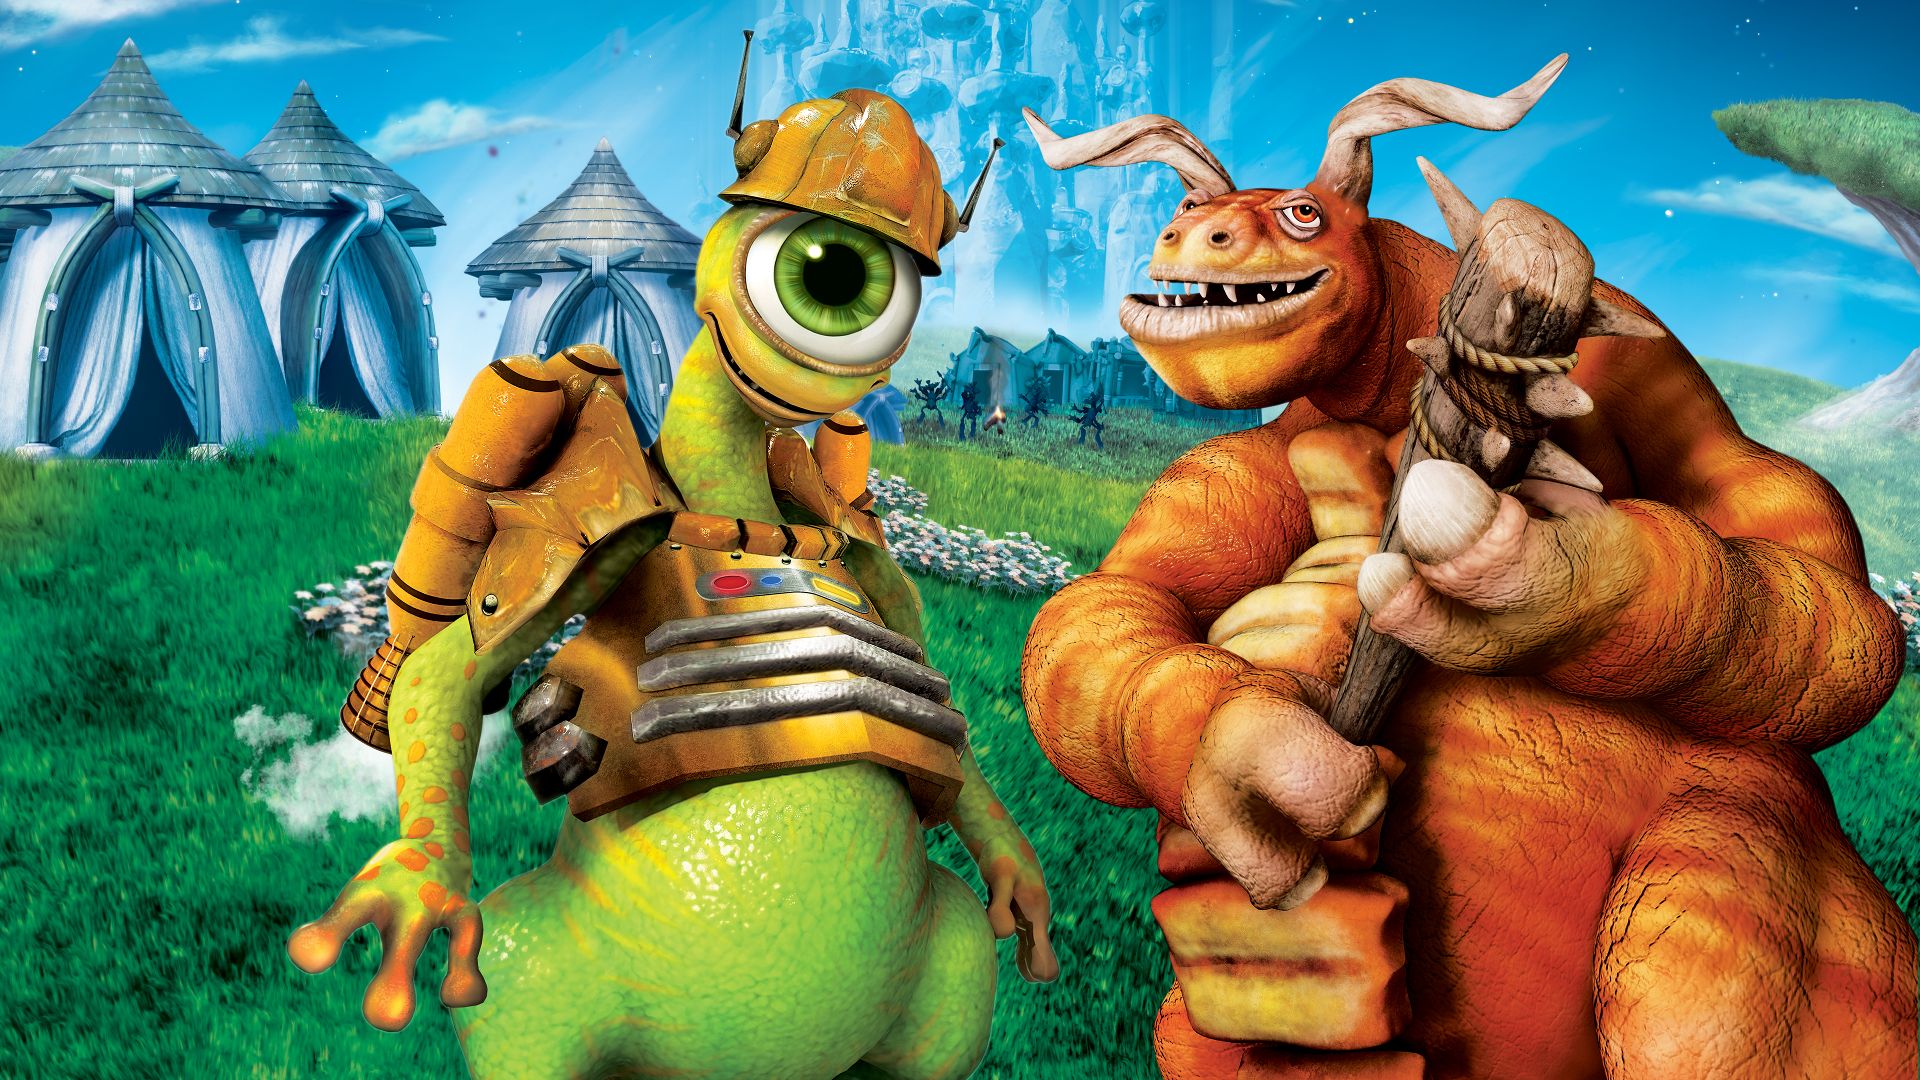 Download Spore Full Game For Free